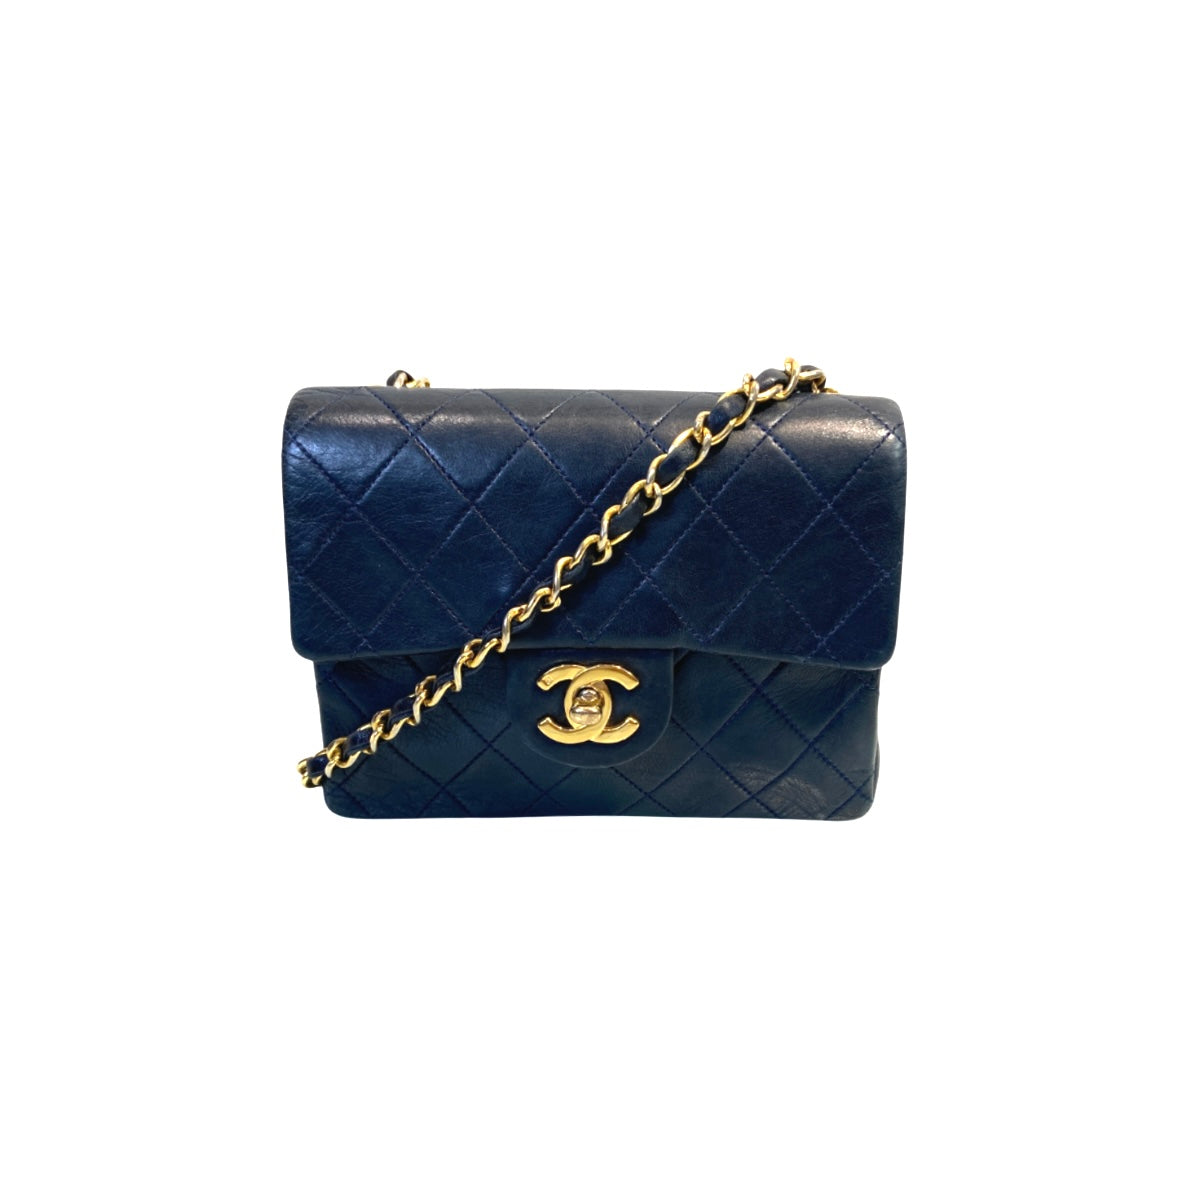 Chanel Classic Timeless Shopping Tote - Blue Totes, Handbags